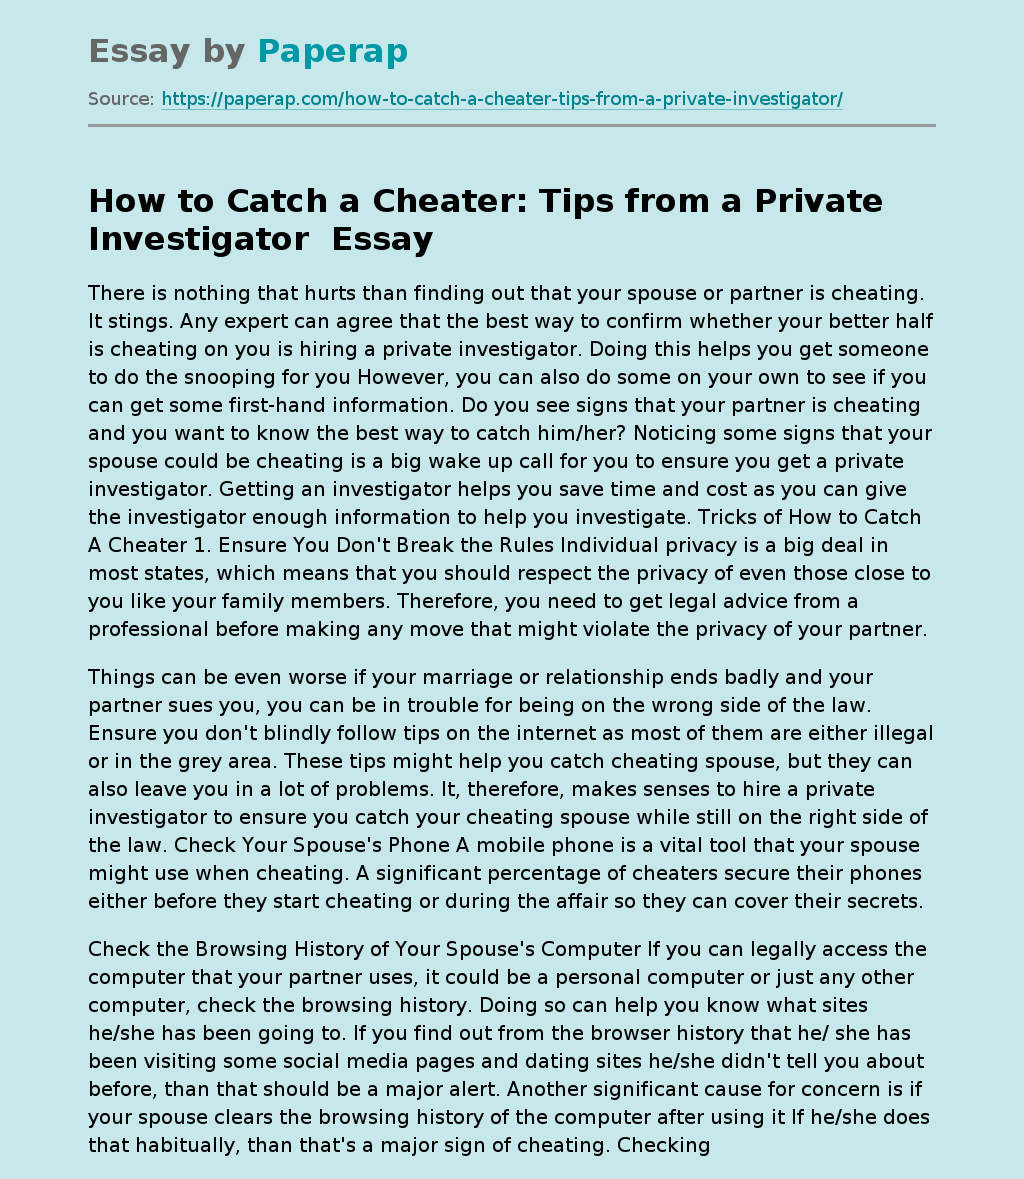 How to Catch a Cheater: Tips from a Private Investigator 